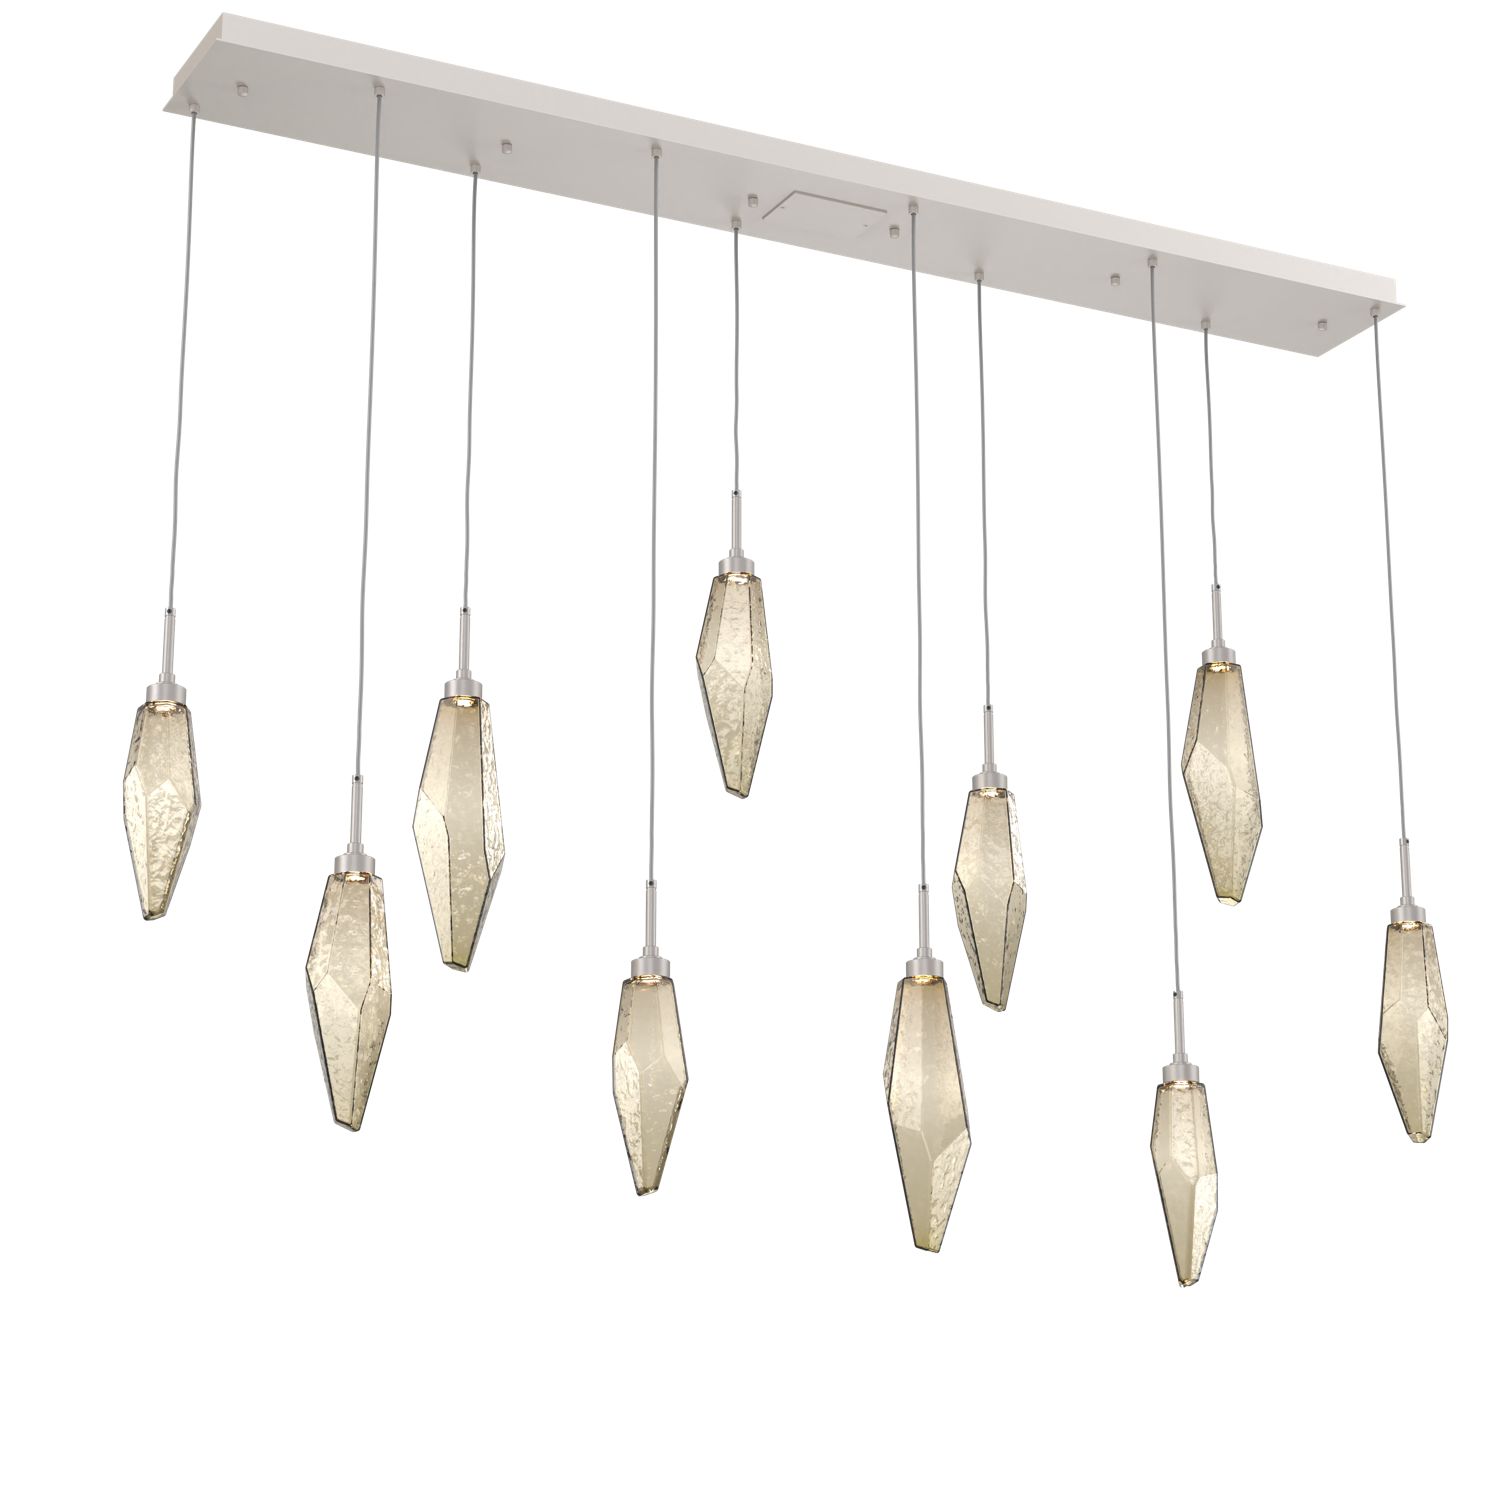 PLB0050-10-BS-CB-Hammerton-Studio-Rock-Crystal-10-light-linear-pendant-chandelier-with-beige-silver-finish-and-chilled-bronze-blown-glass-shades-and-LED-lamping